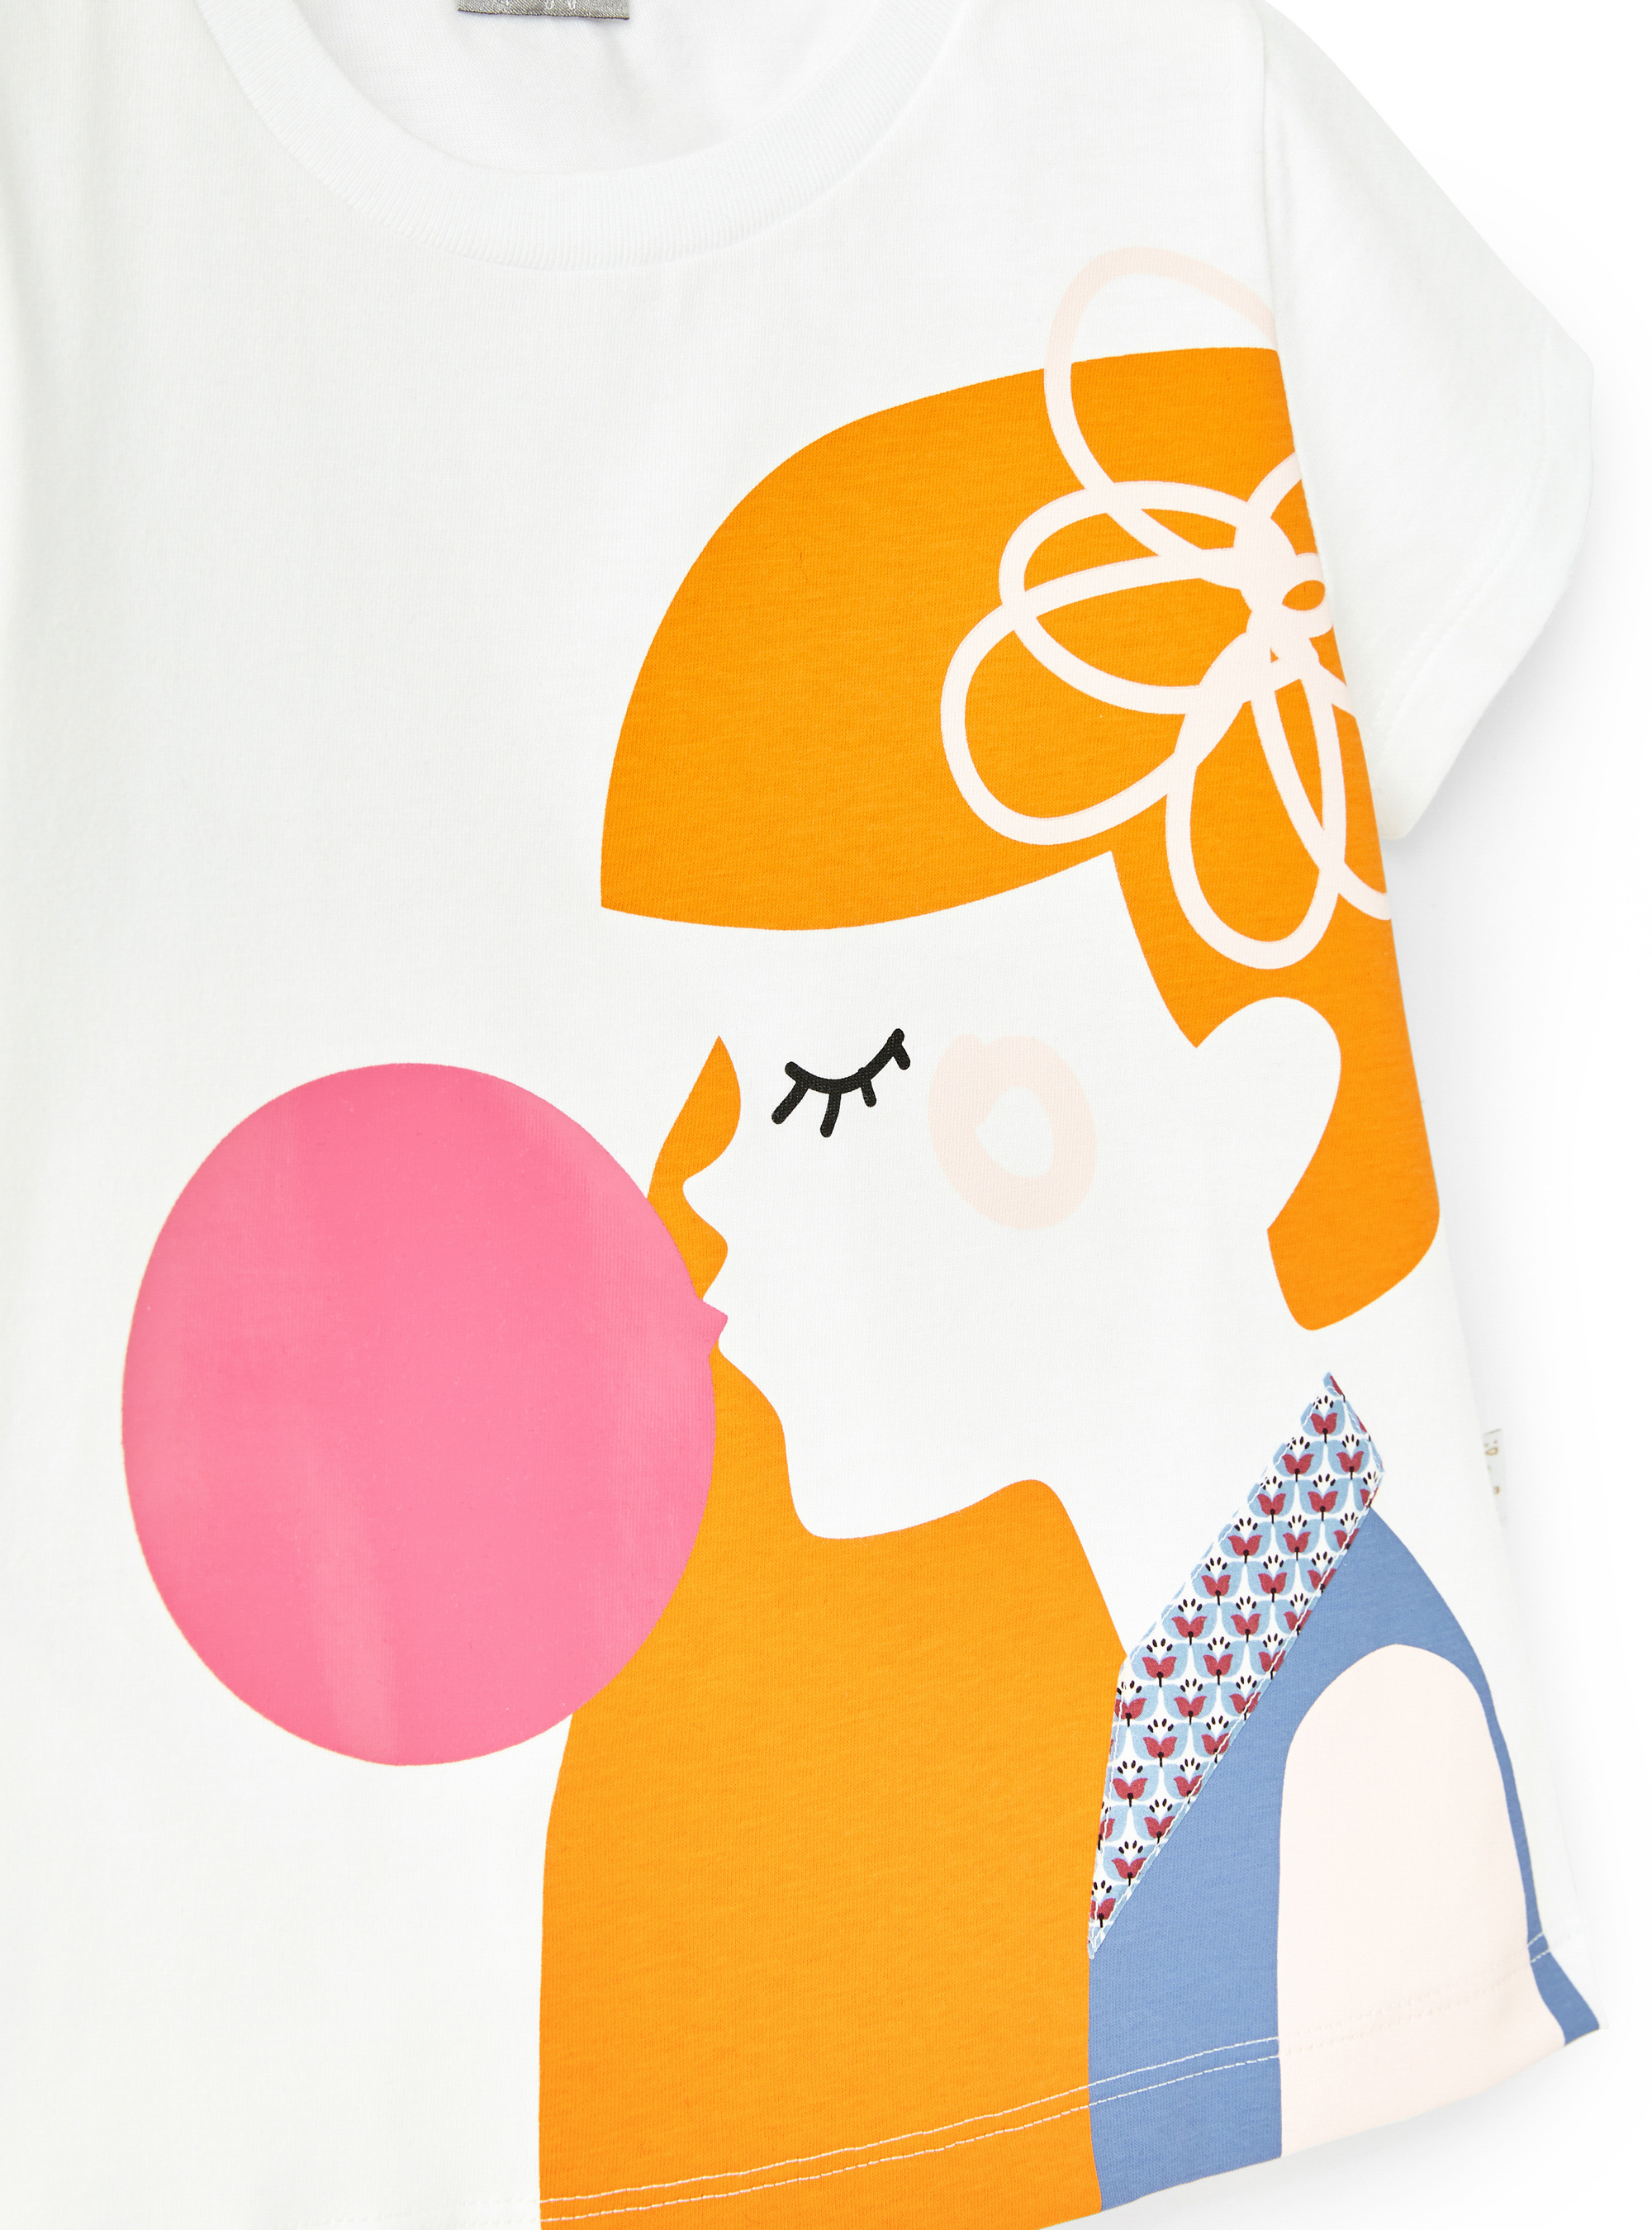 T-shirt with baby girl print - White | Il Gufo